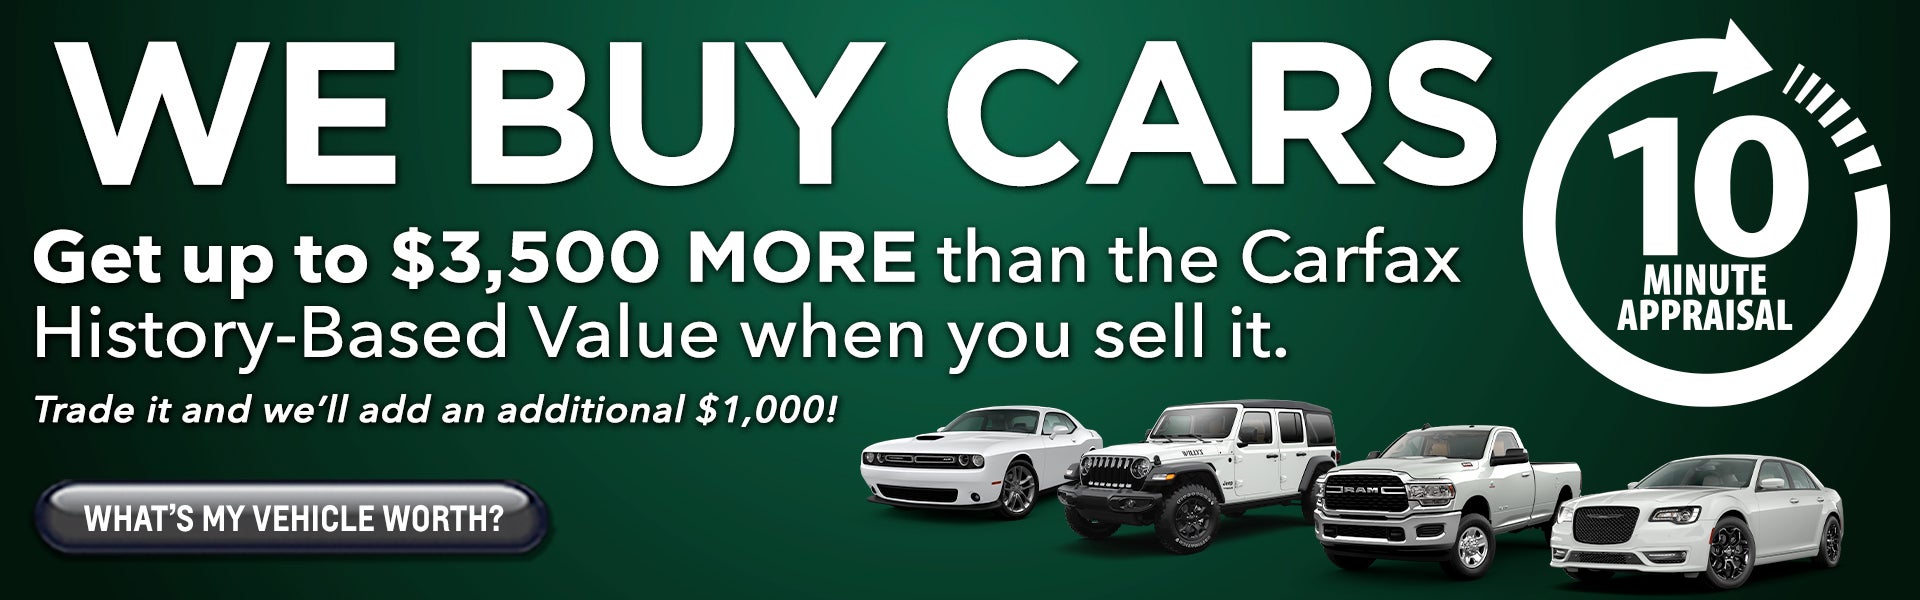 We Buy Cars | Get More than the Carfax value